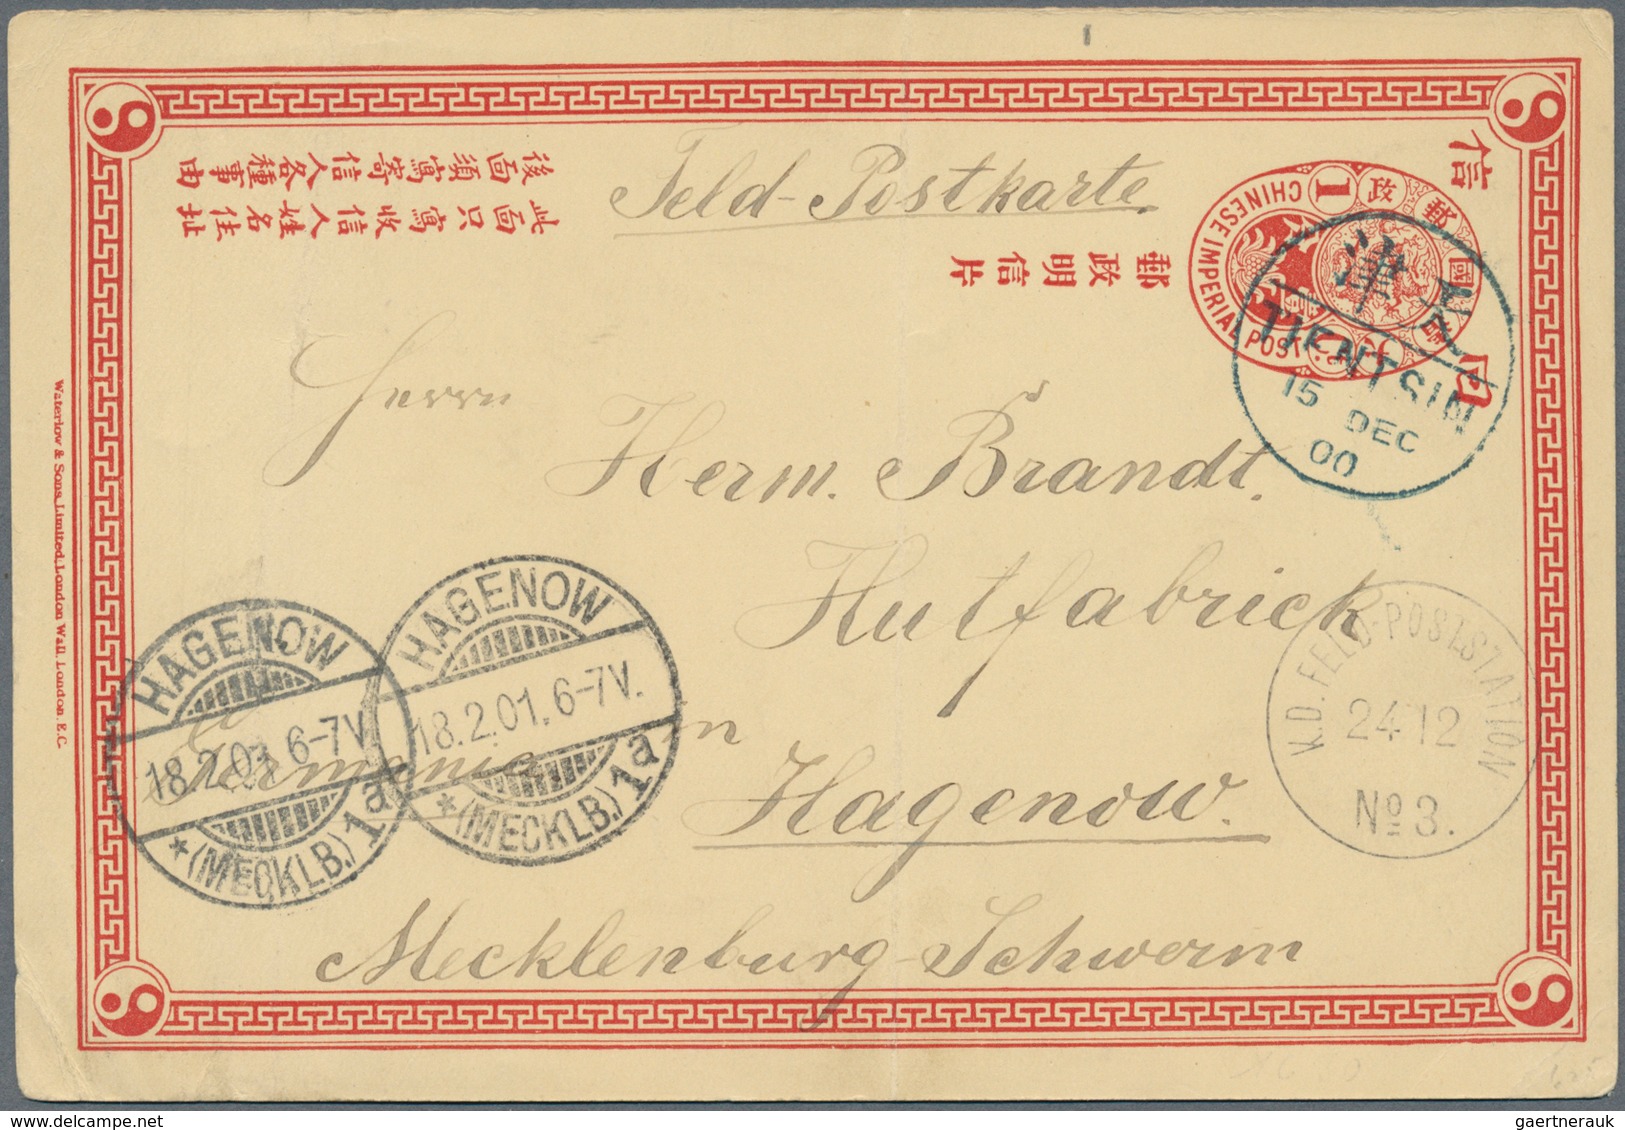 China - Ganzsachen: 1898, CIP 1 C. Reply Part Canc. "TIENTSIN 15 DEC 00" Used As German Field Post C - Postcards